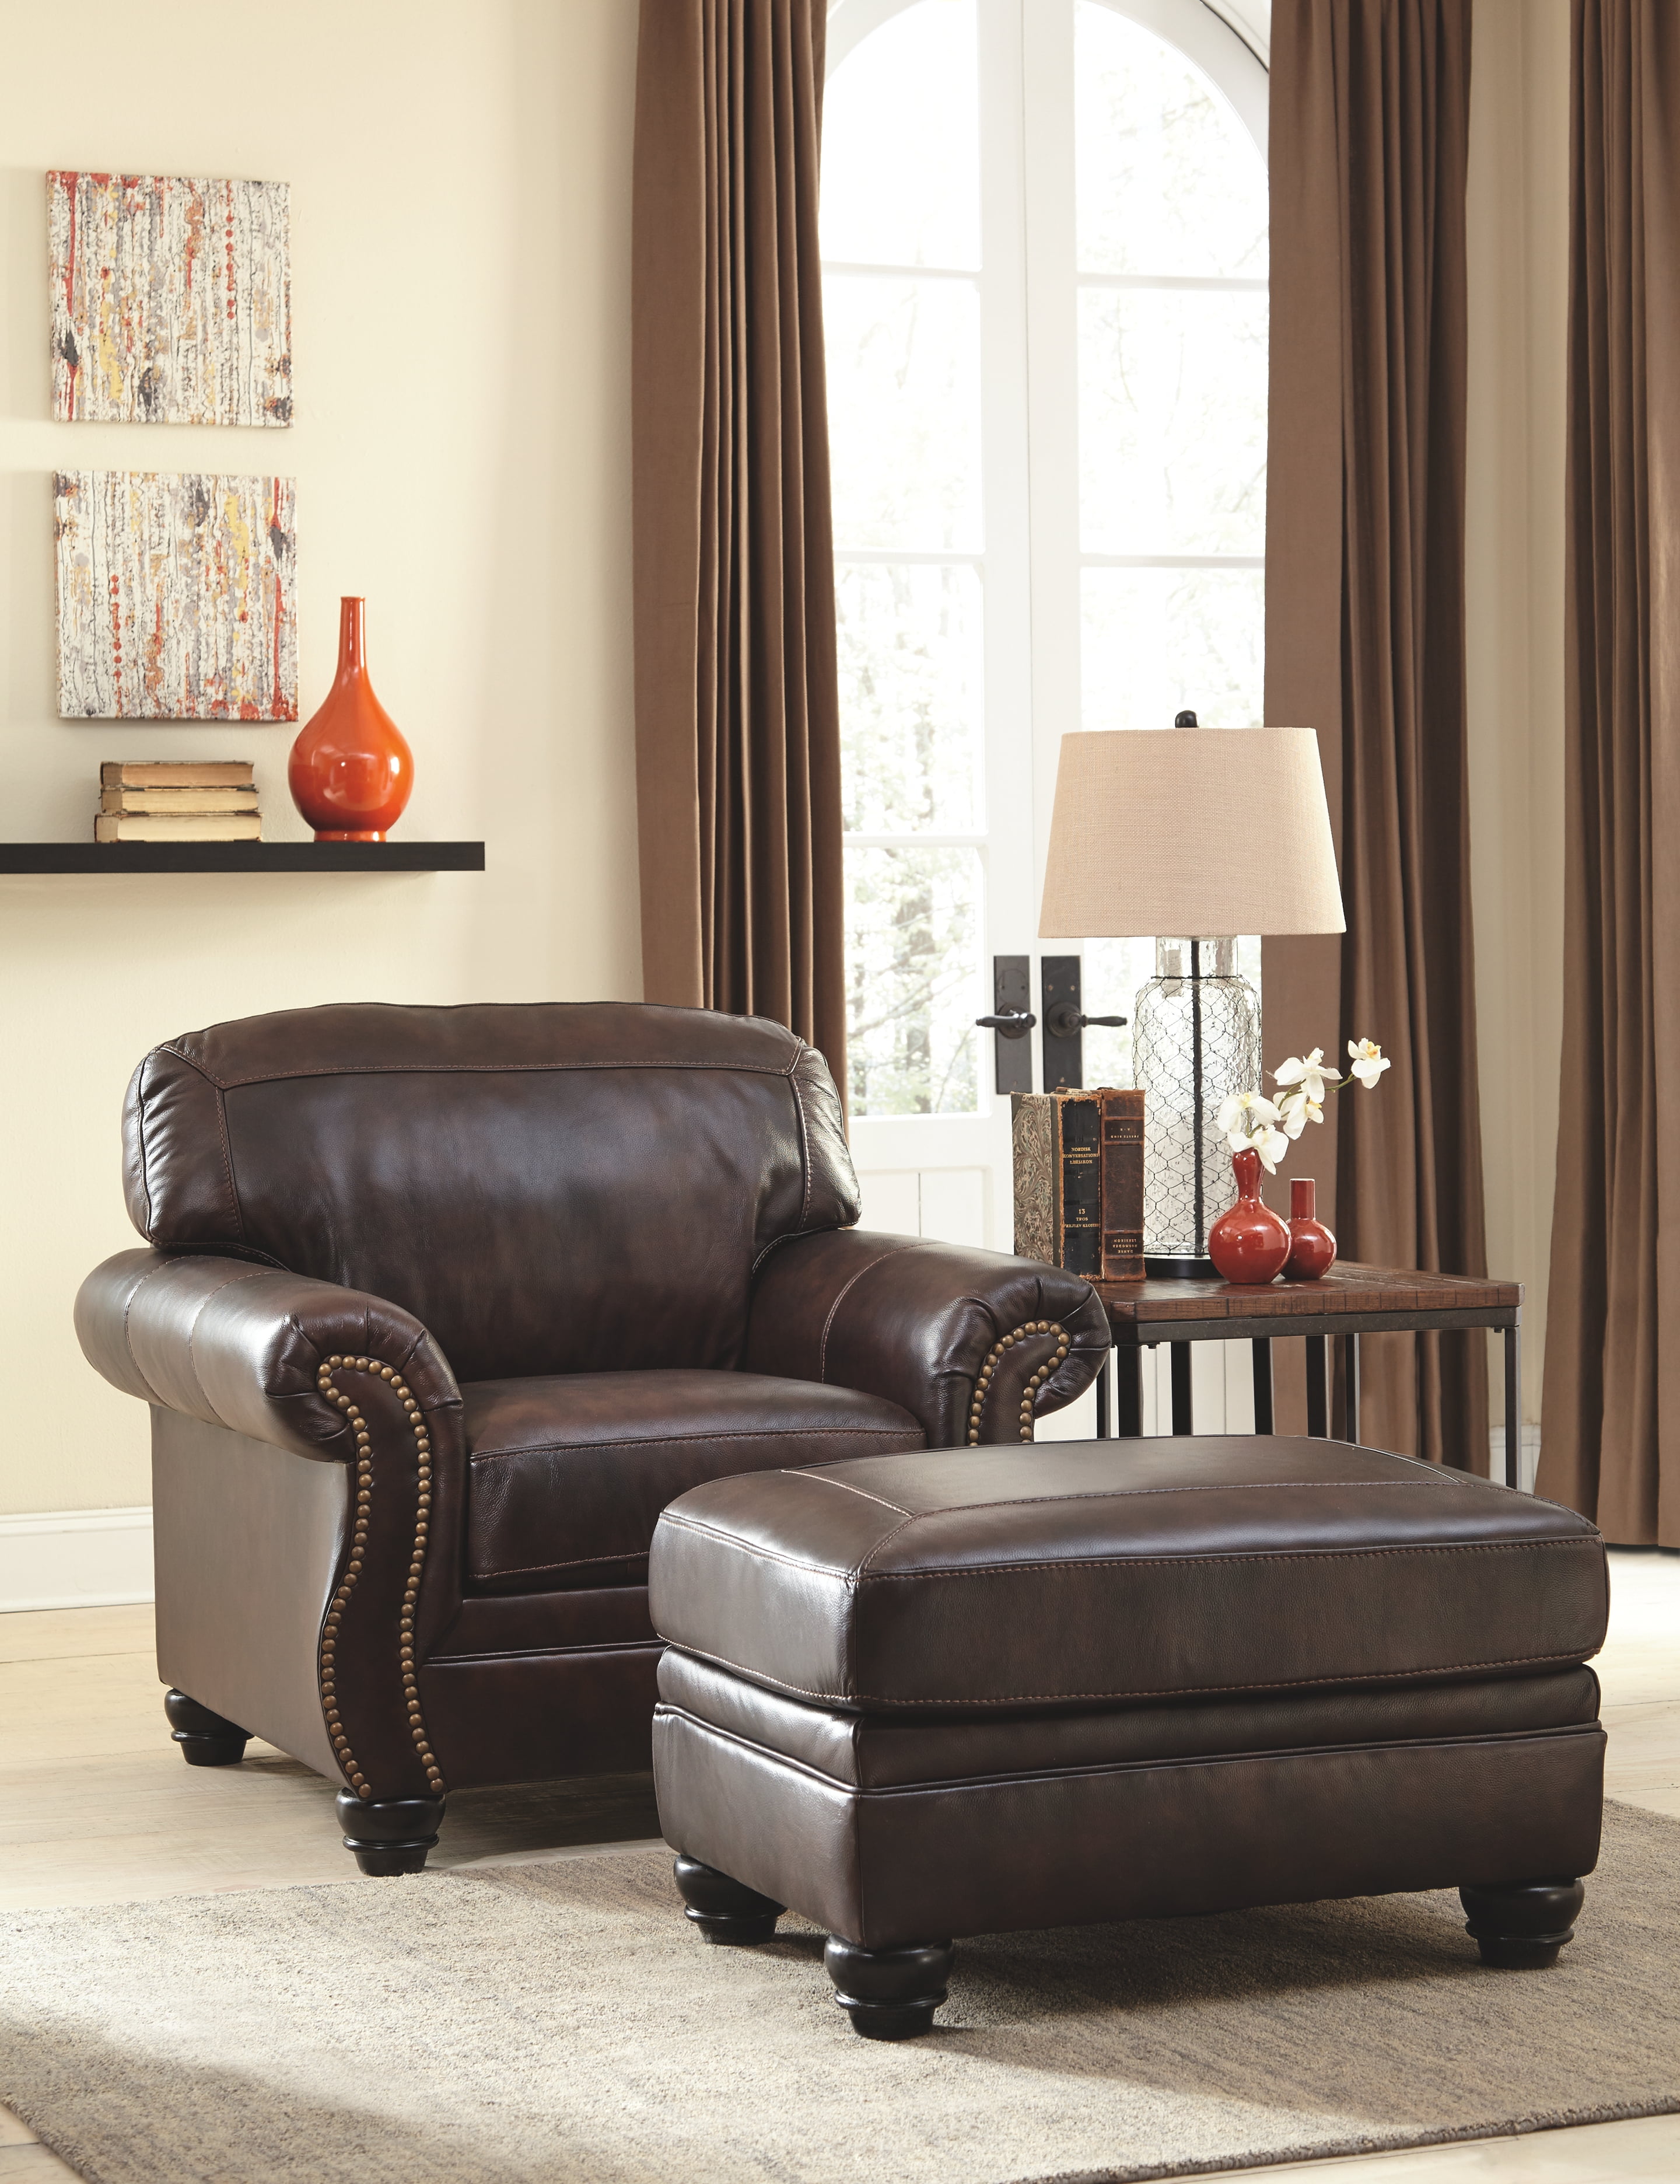 Ashley Furniture Bristan Chair In, Ashley Furniture Leather Chair And Ottoman